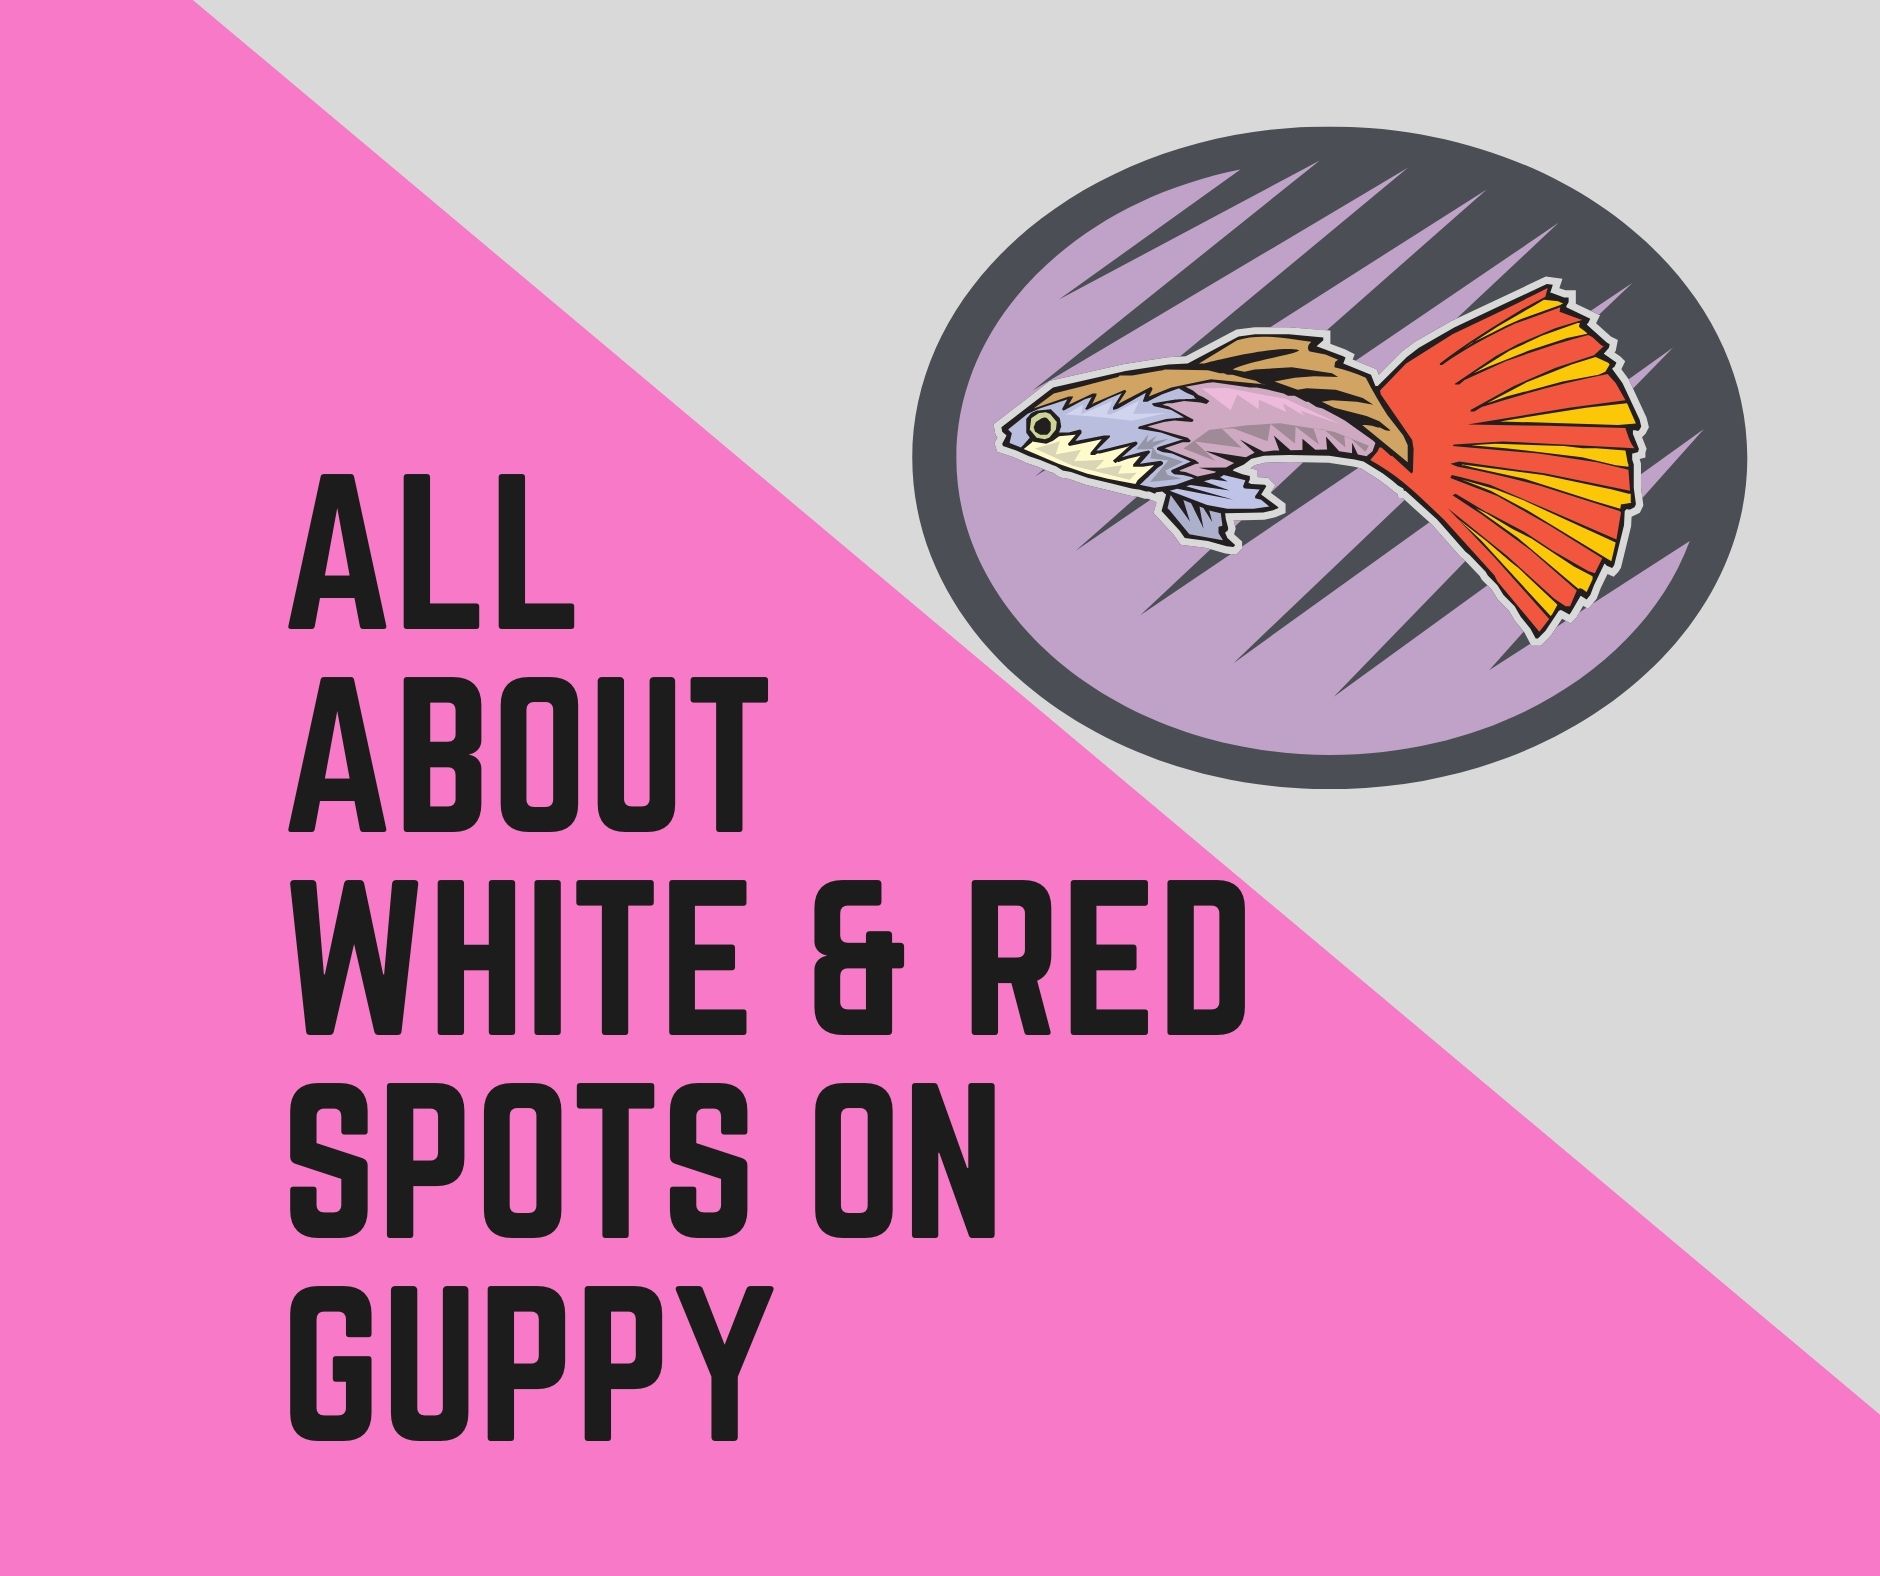 All About White & Red Spots On Guppy